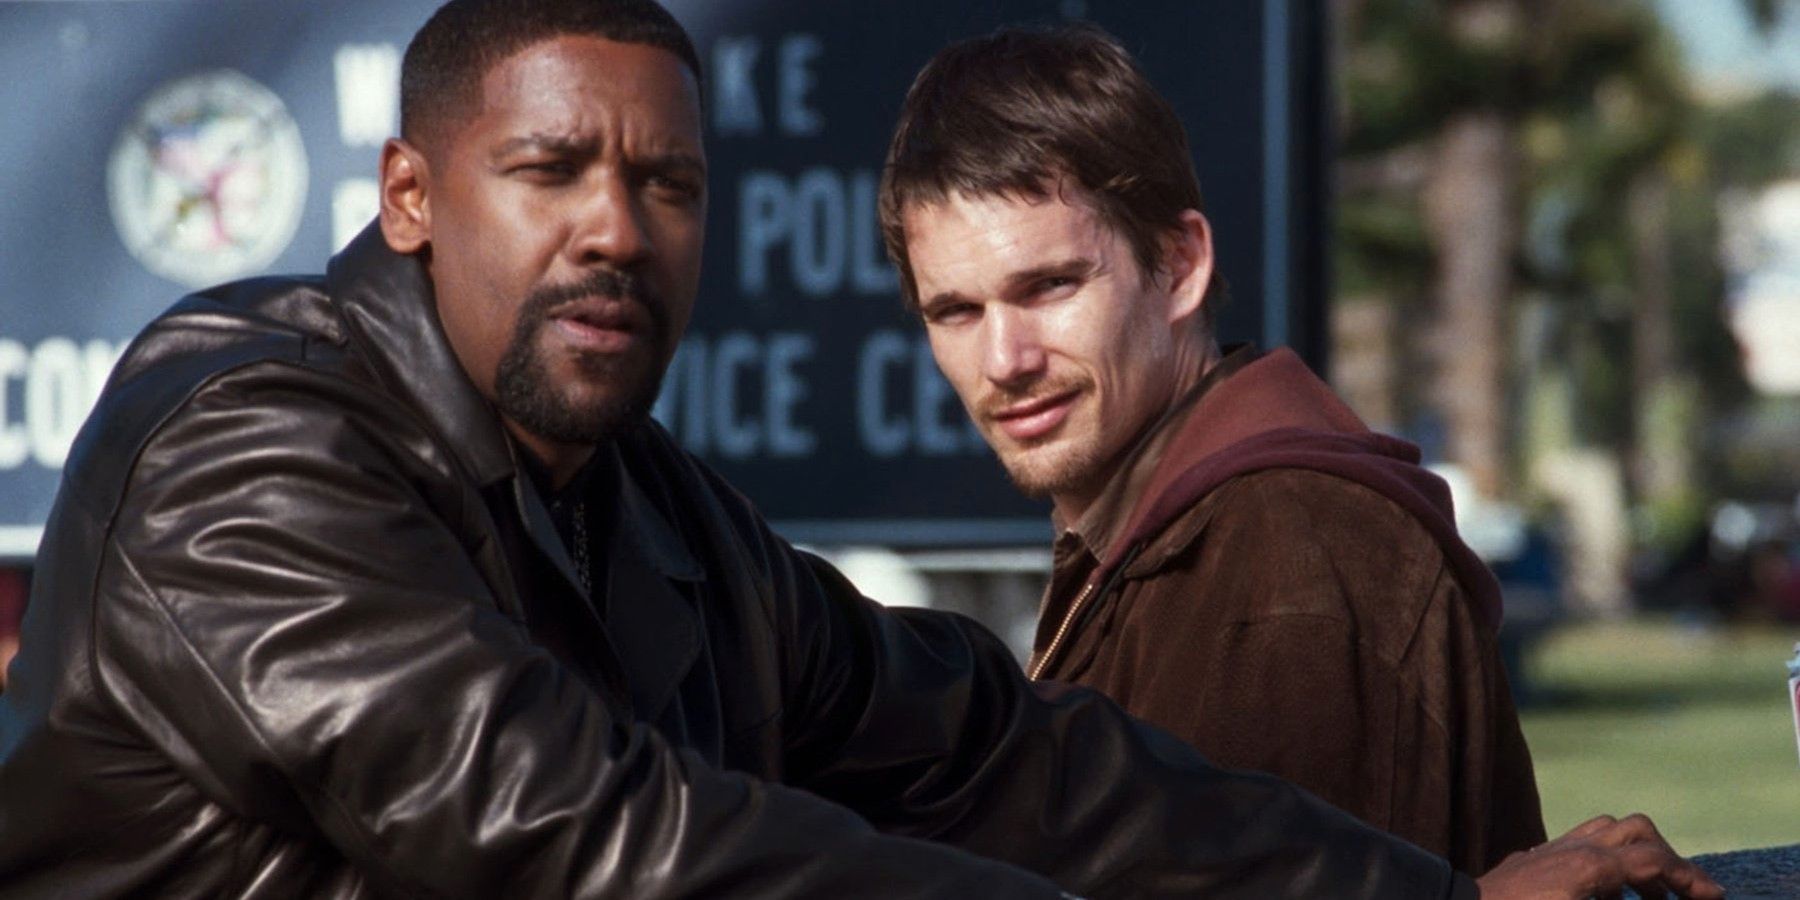 LAPD officers Alonzo Harris (Denzel Washington) and Jake Hoyt (Ethan Hawke) look into the camera in the movie Training Day.